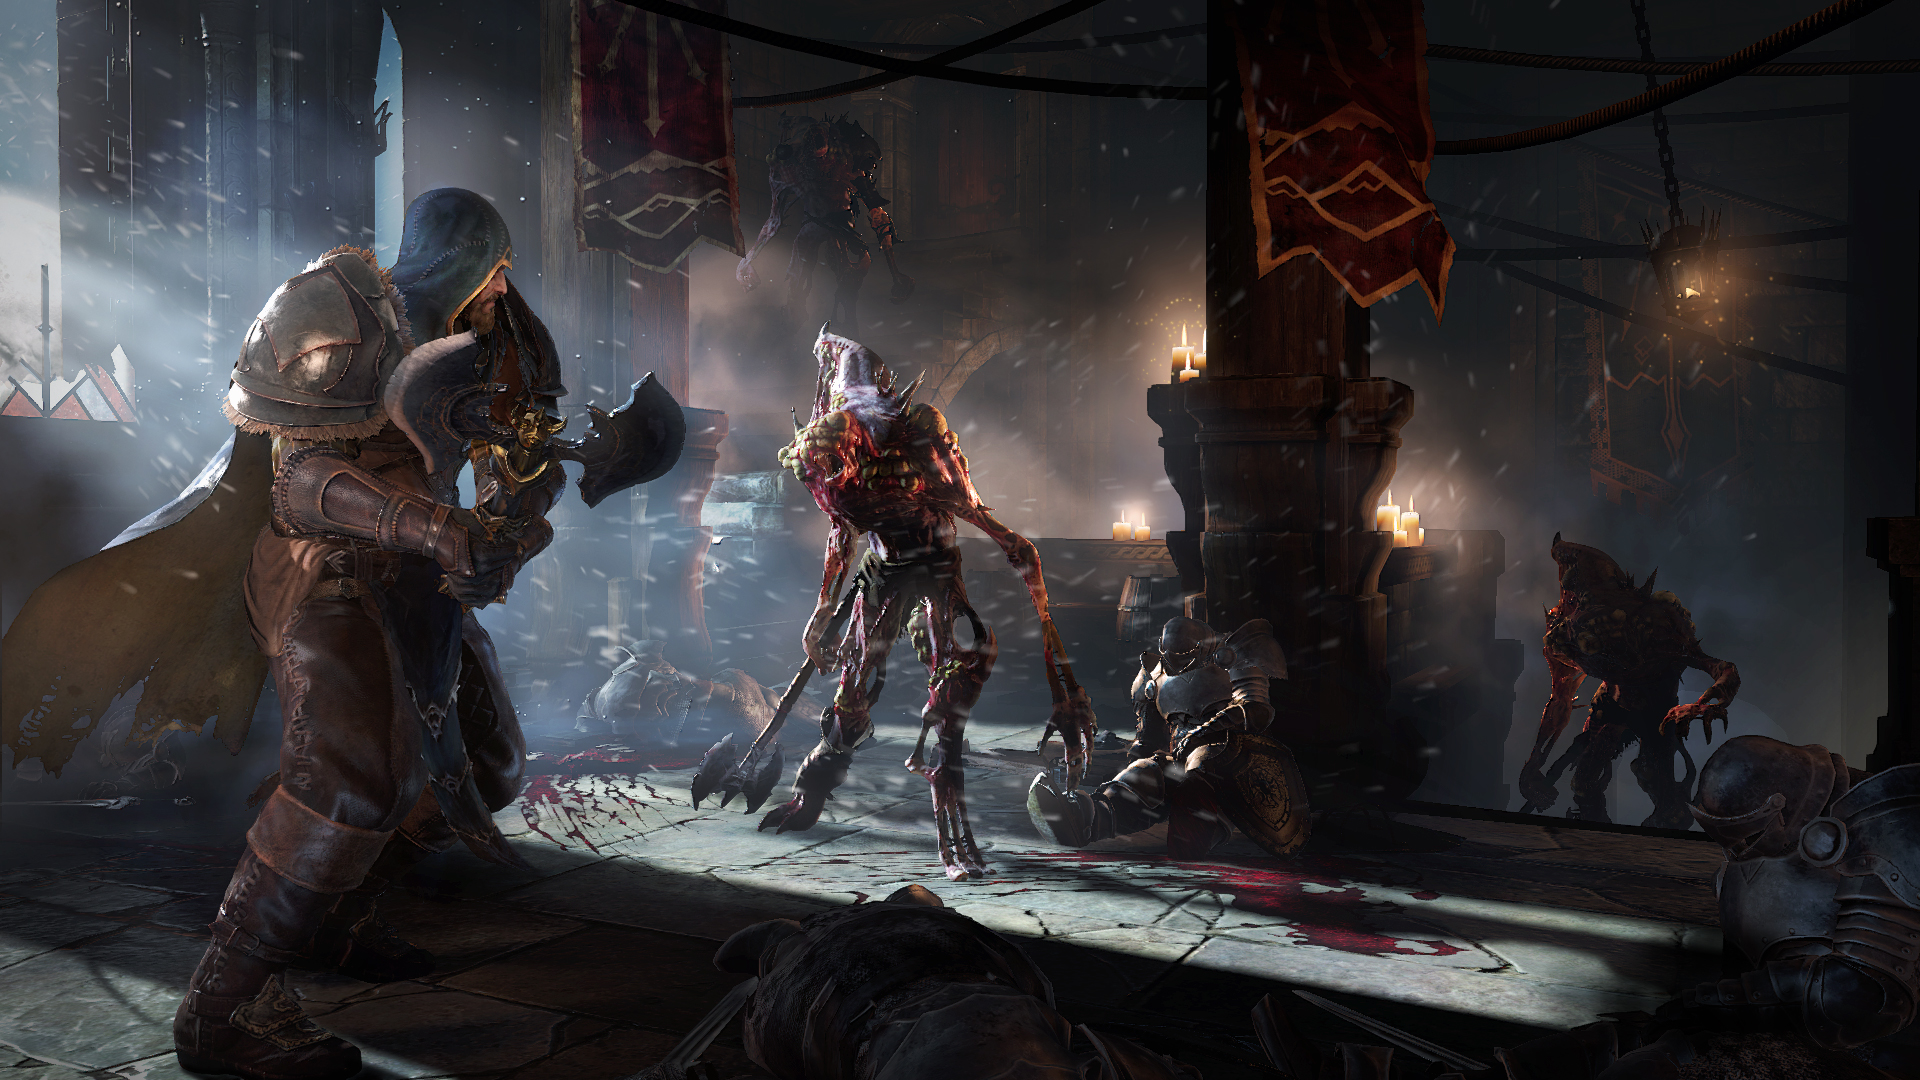 Hexworks is developing two expansions for Lords of the Fallen - Xfire